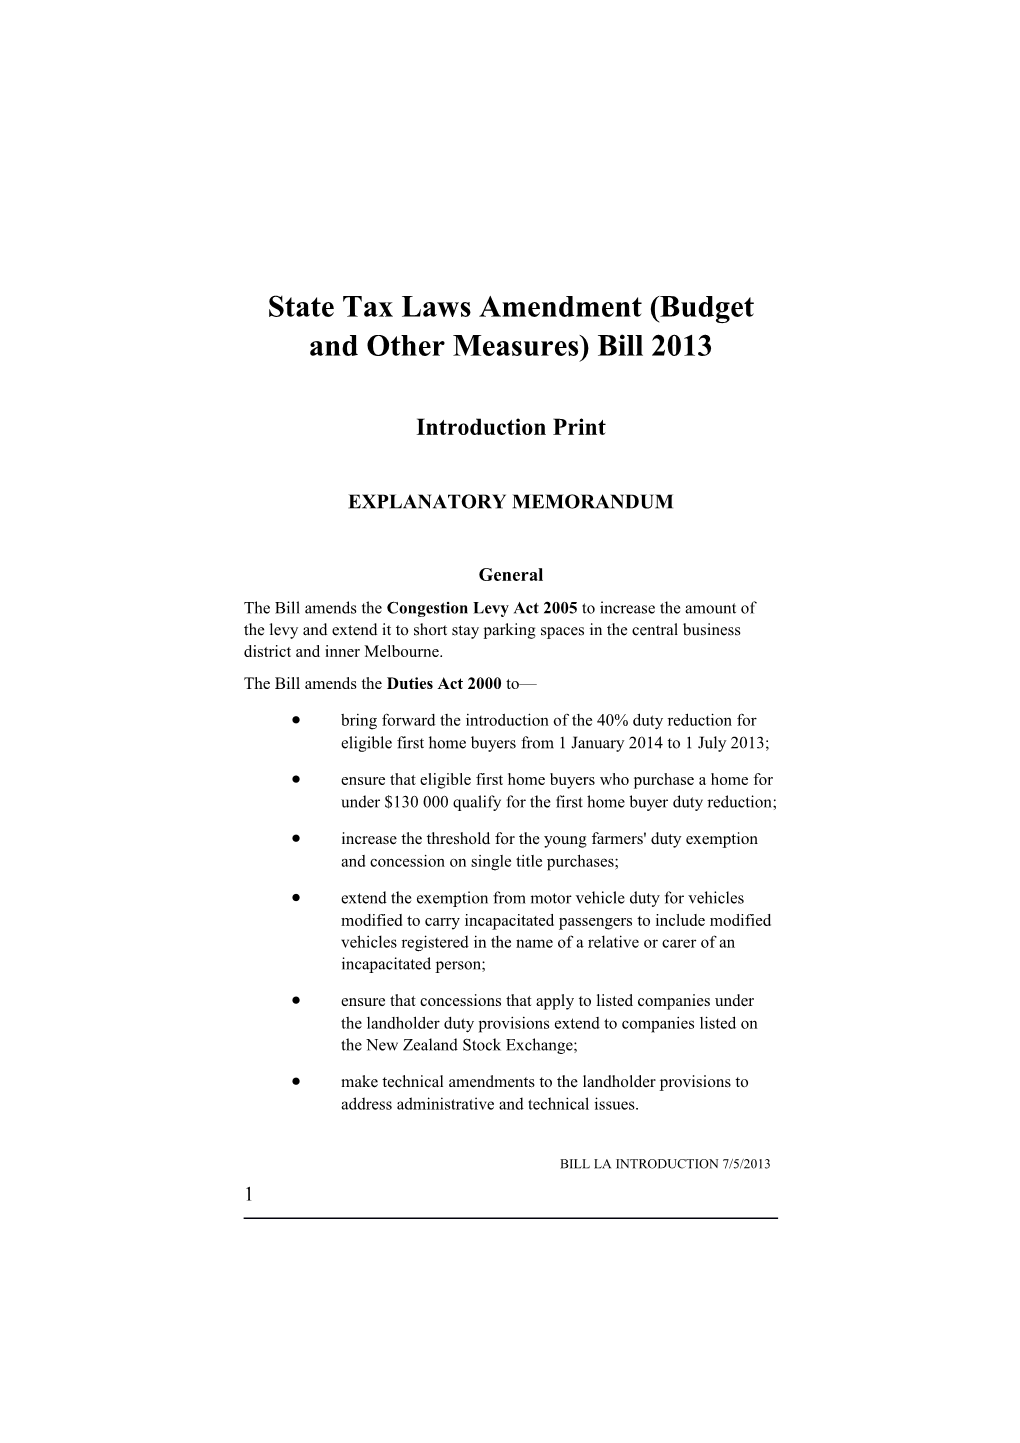 State Tax Laws Amendment (Budget and Other Measures) Bill 2013